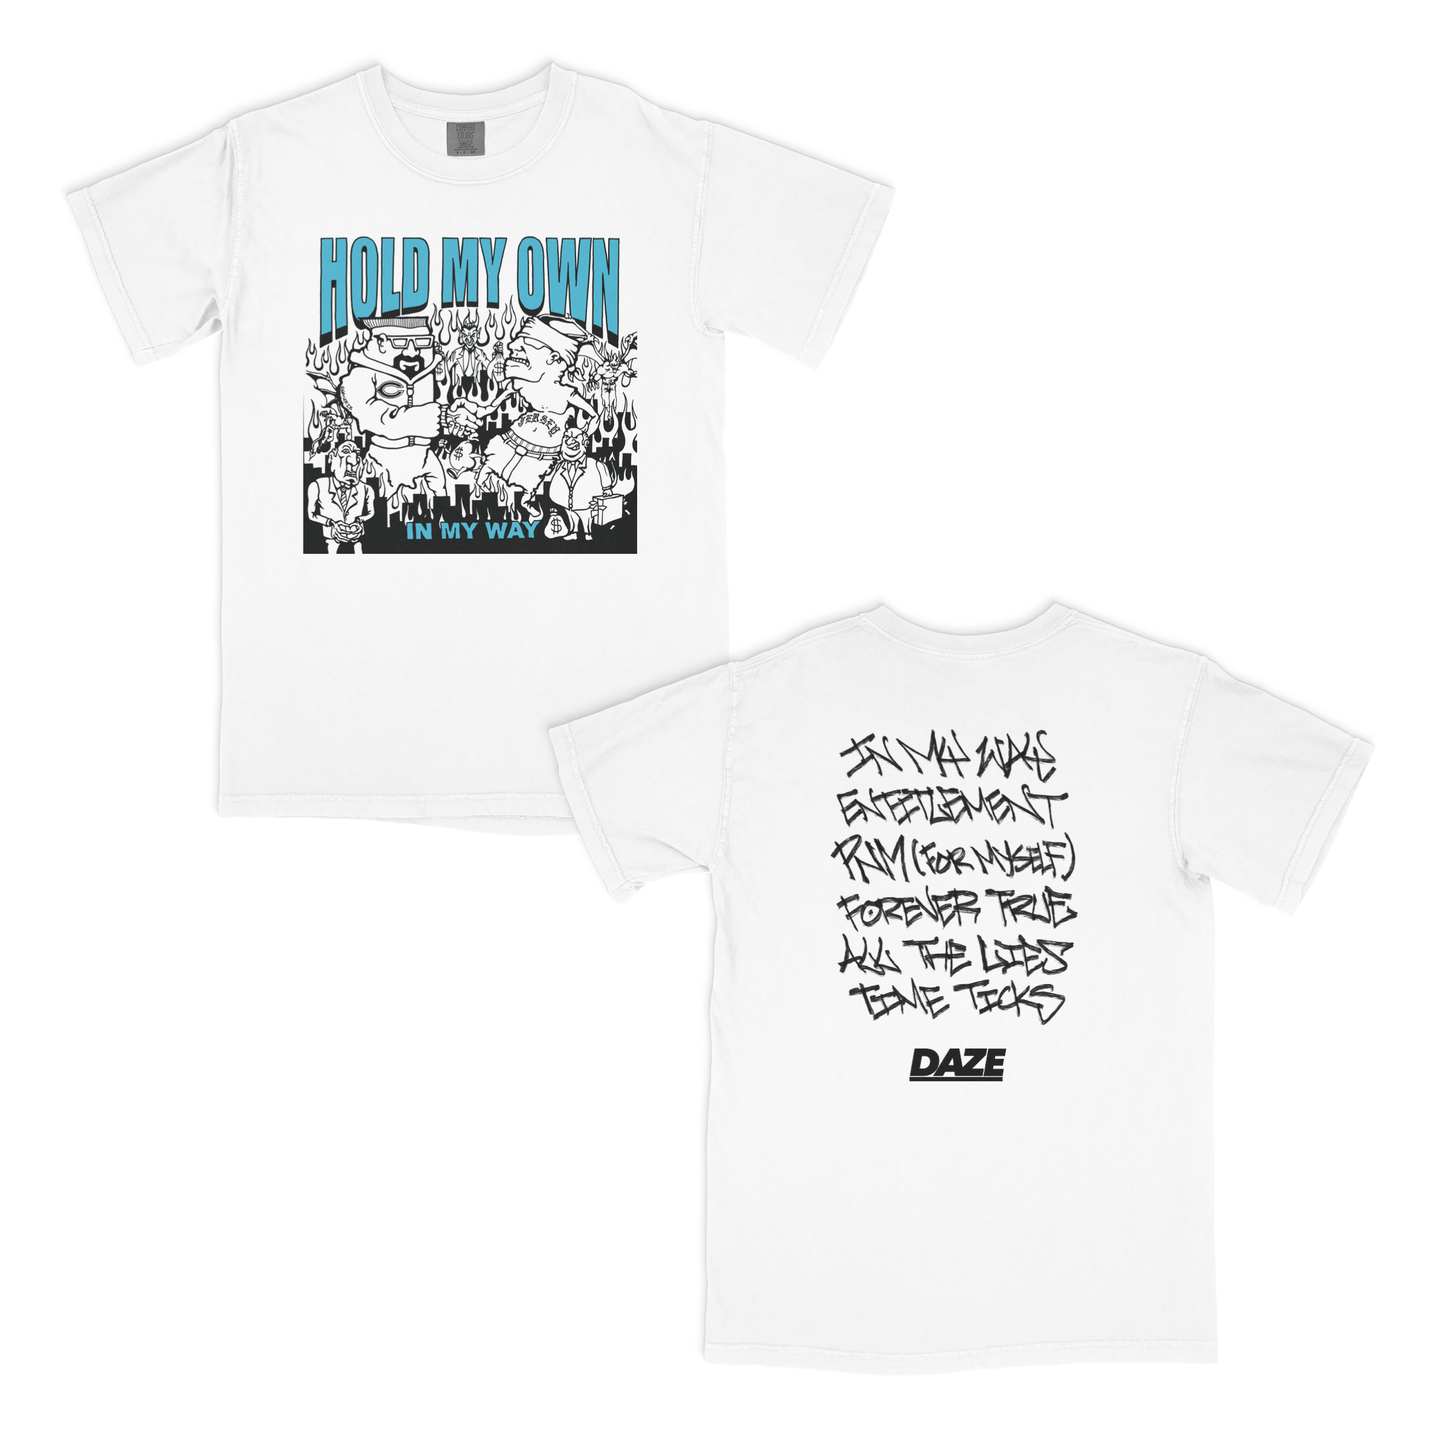 Hold My Own - In My Way Shirt